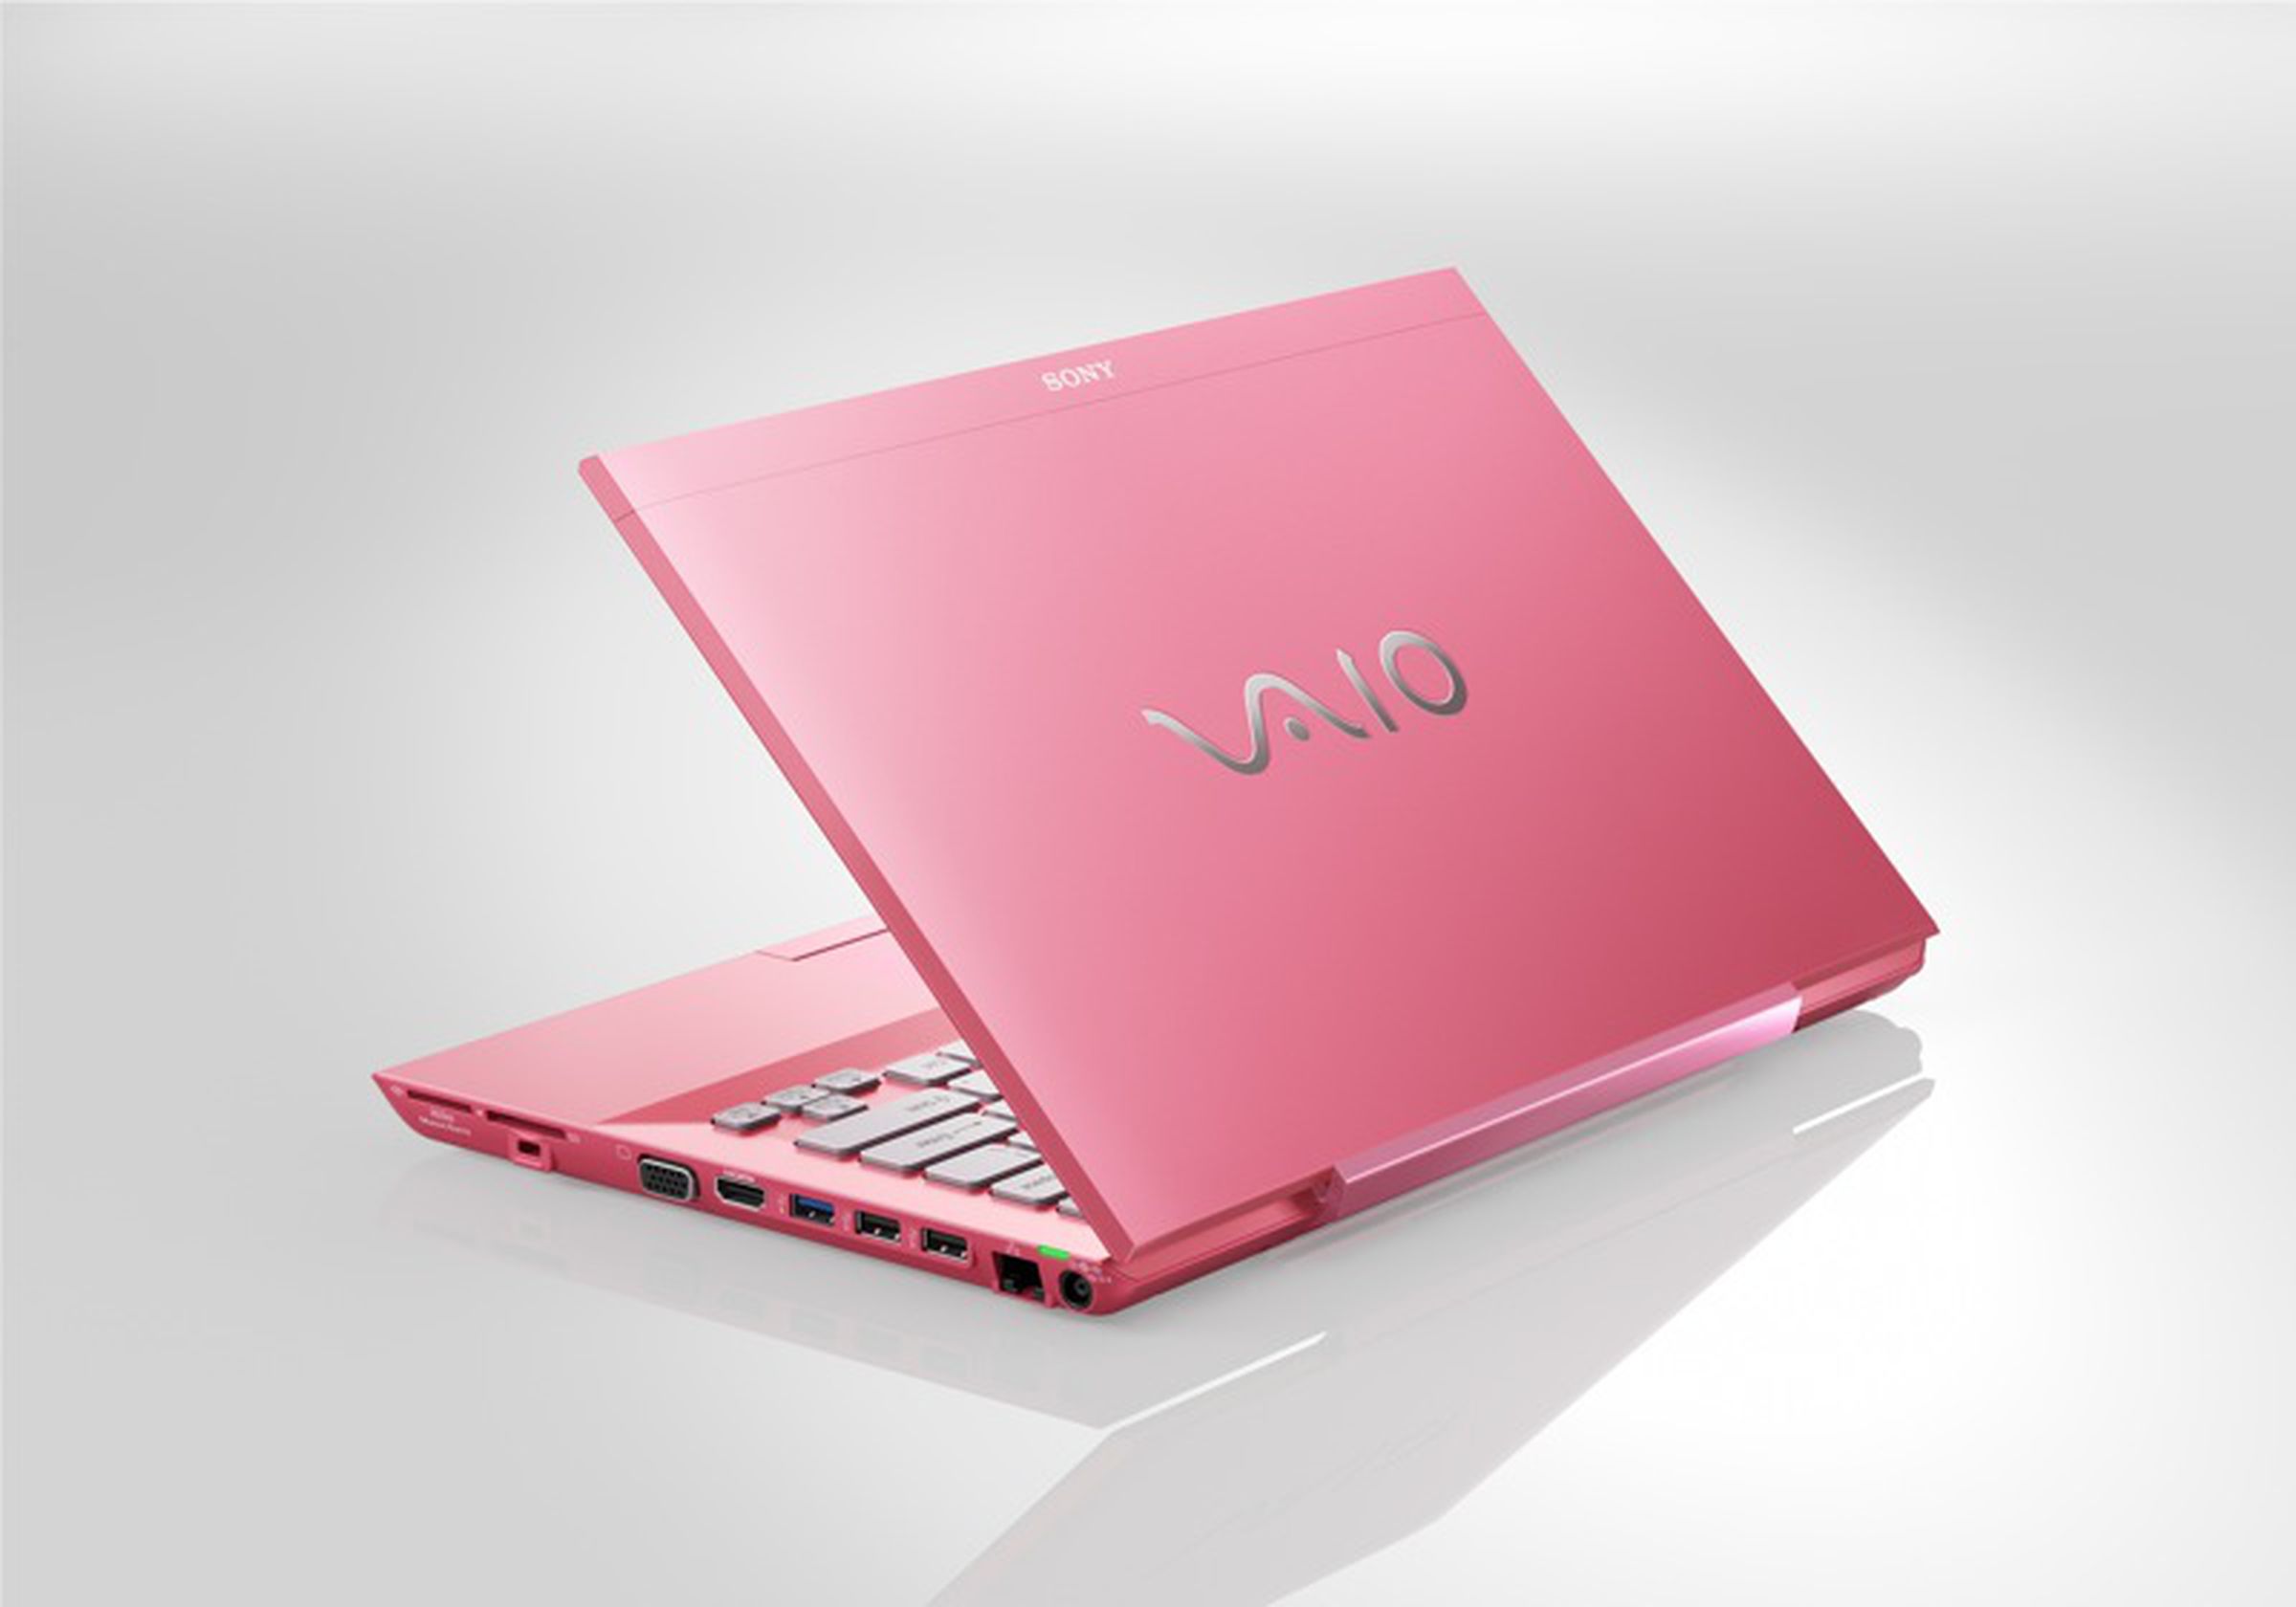 Sony VAIO SA and SB refreshed: the month of thin, powerful PCs continues!